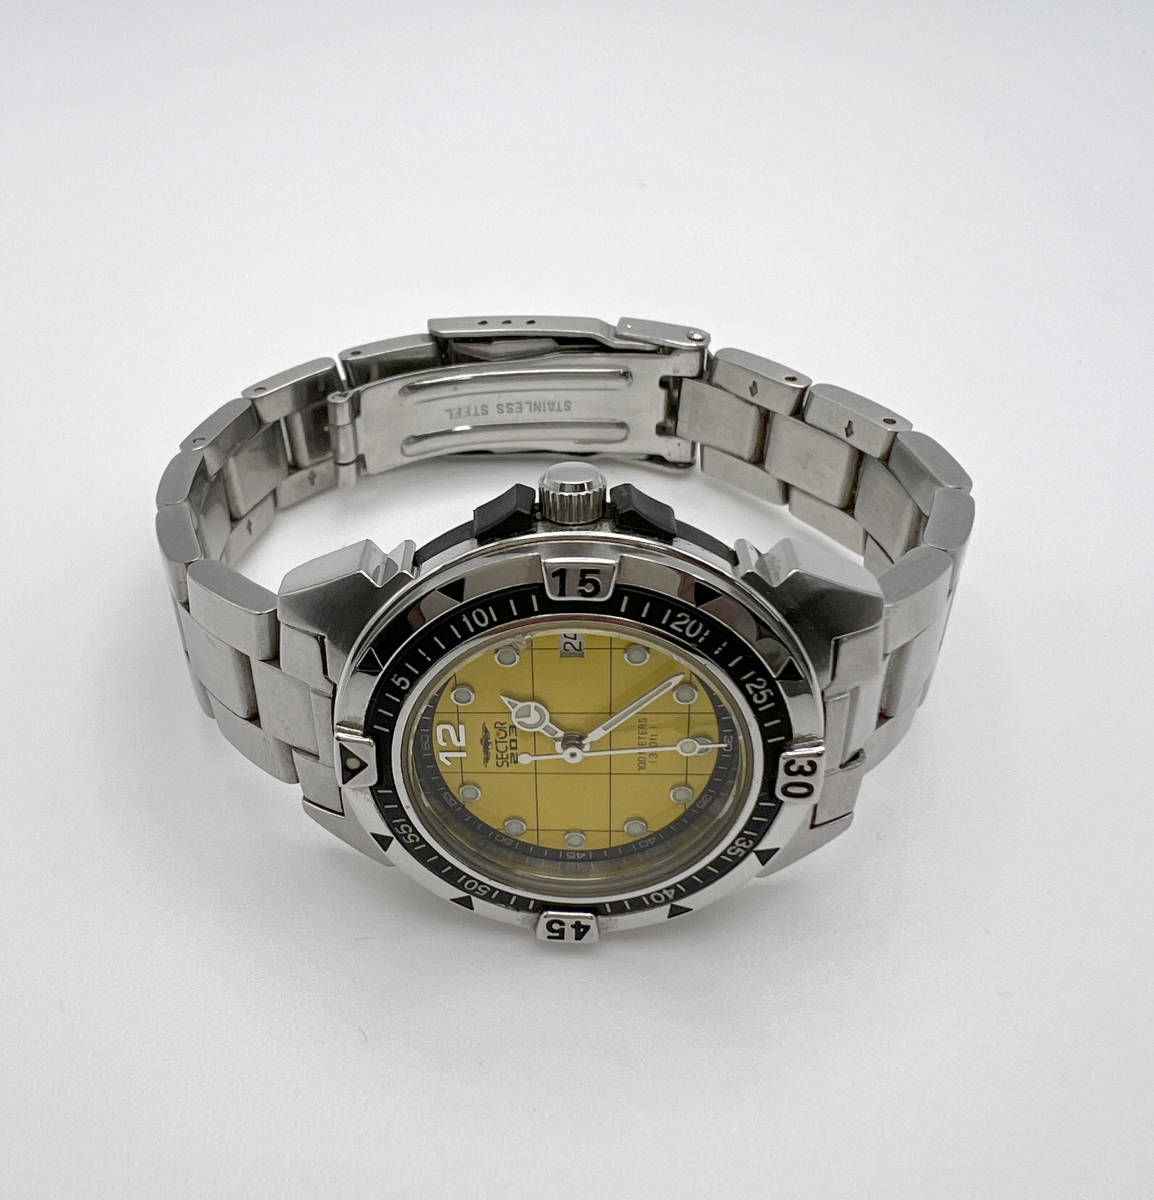  operation middle SECTOR Sector 203 quartz yellow face Date rotation bezel SS lady's men's wristwatch 